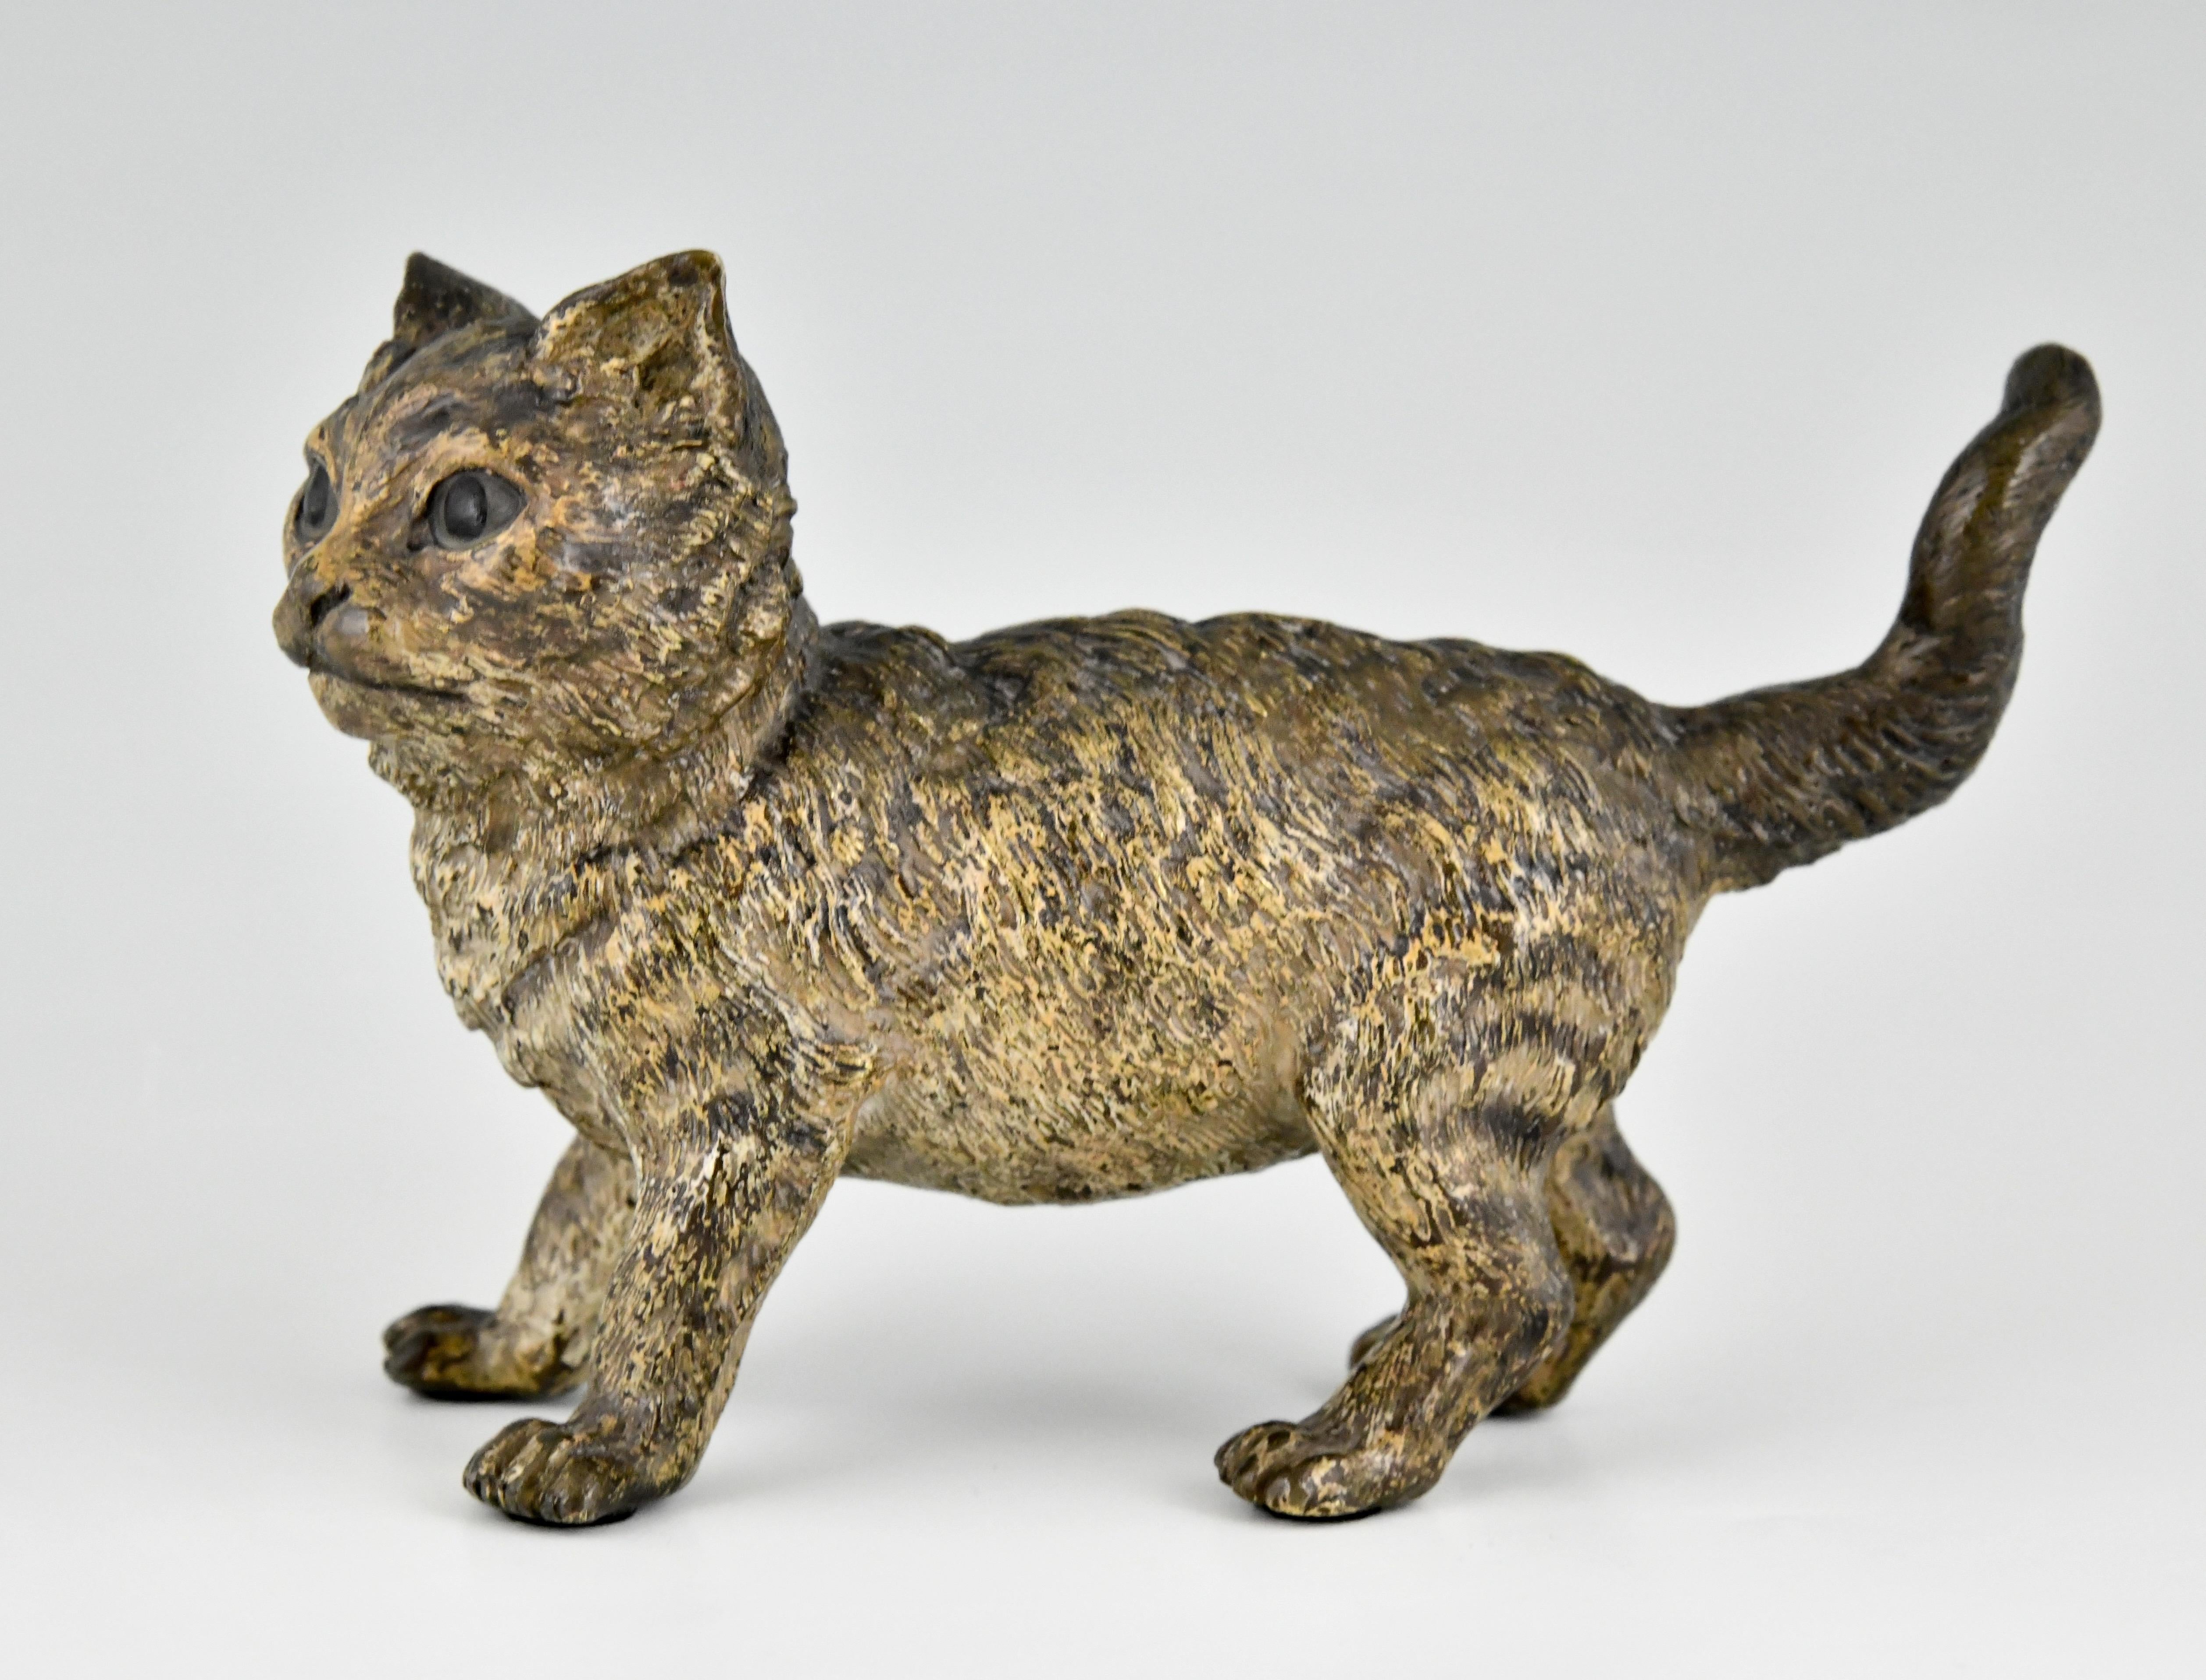 Antique Vienna bronze sculpture of a cat by Bergman.
Stamped FB and Geschutzt. Cold painted patina.
This model is illustrated in “Antique Vienna bronzes“ by Joseph Zobel. Schiffer. 
More information: “Bronzes de Vienne” by Ernest Hrabalek, les